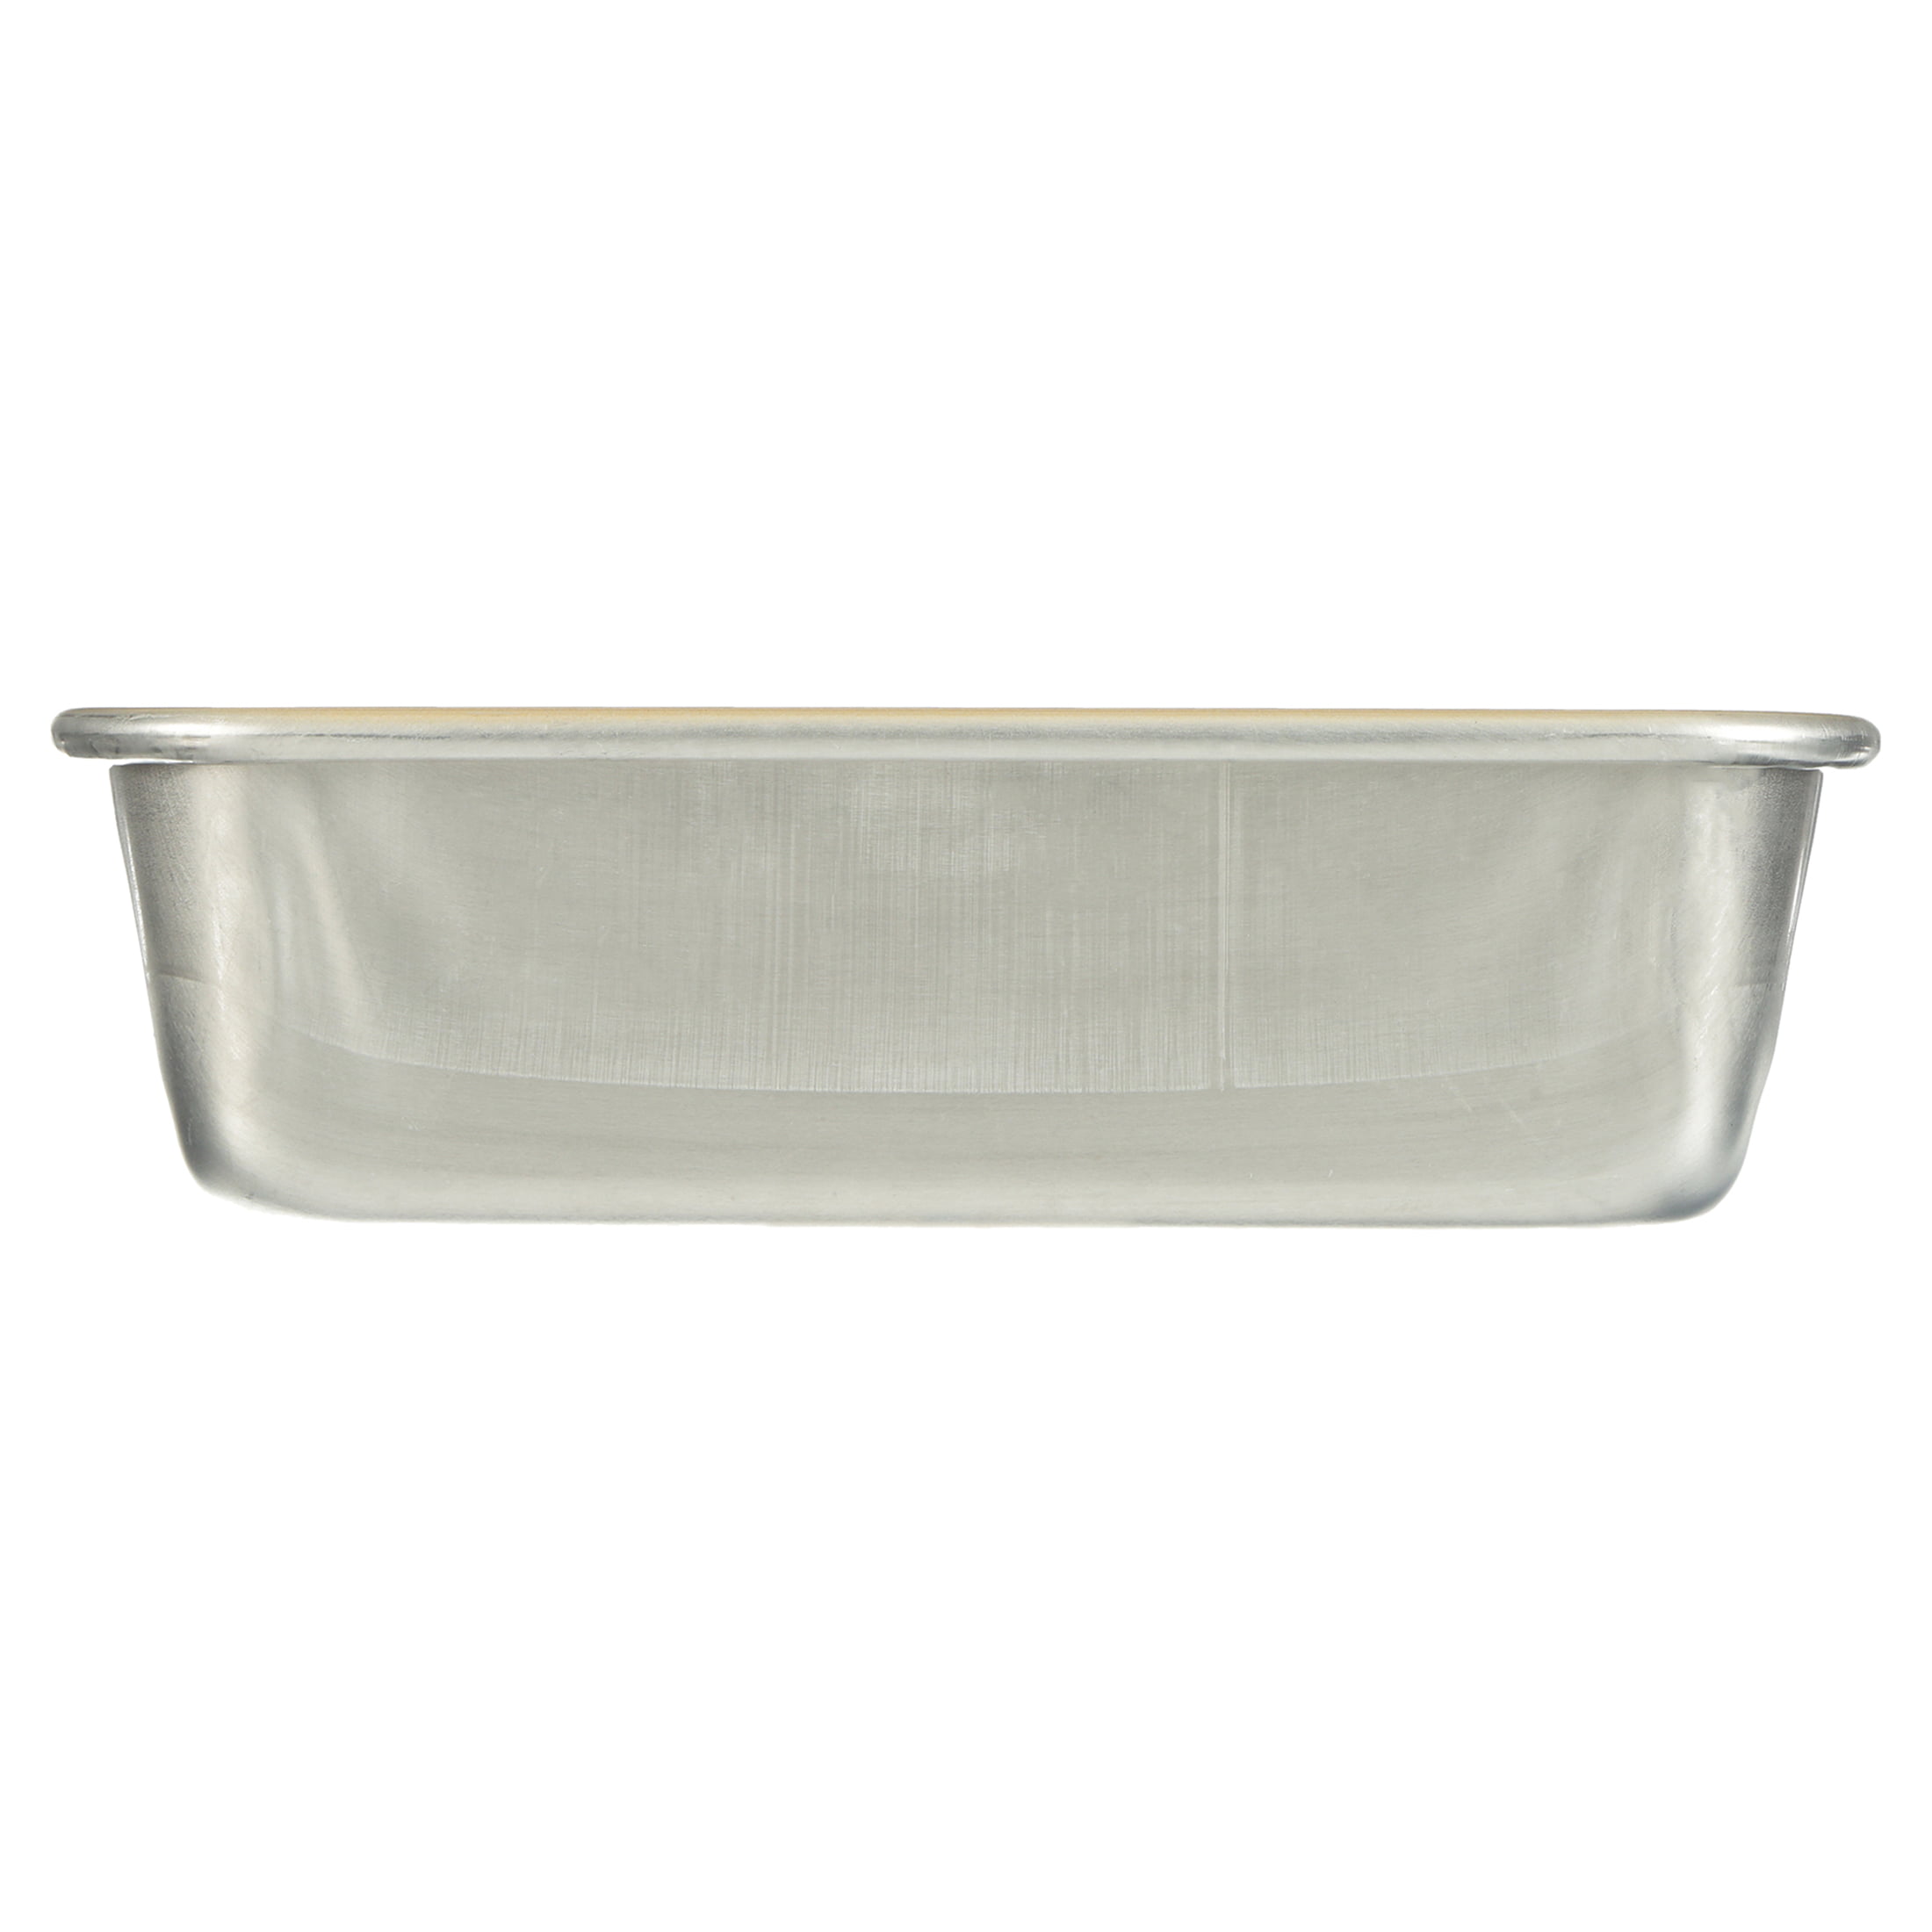 Nordic Ware 1.5 lbs. Naturals Loaf Pan 45900M - The Home Depot